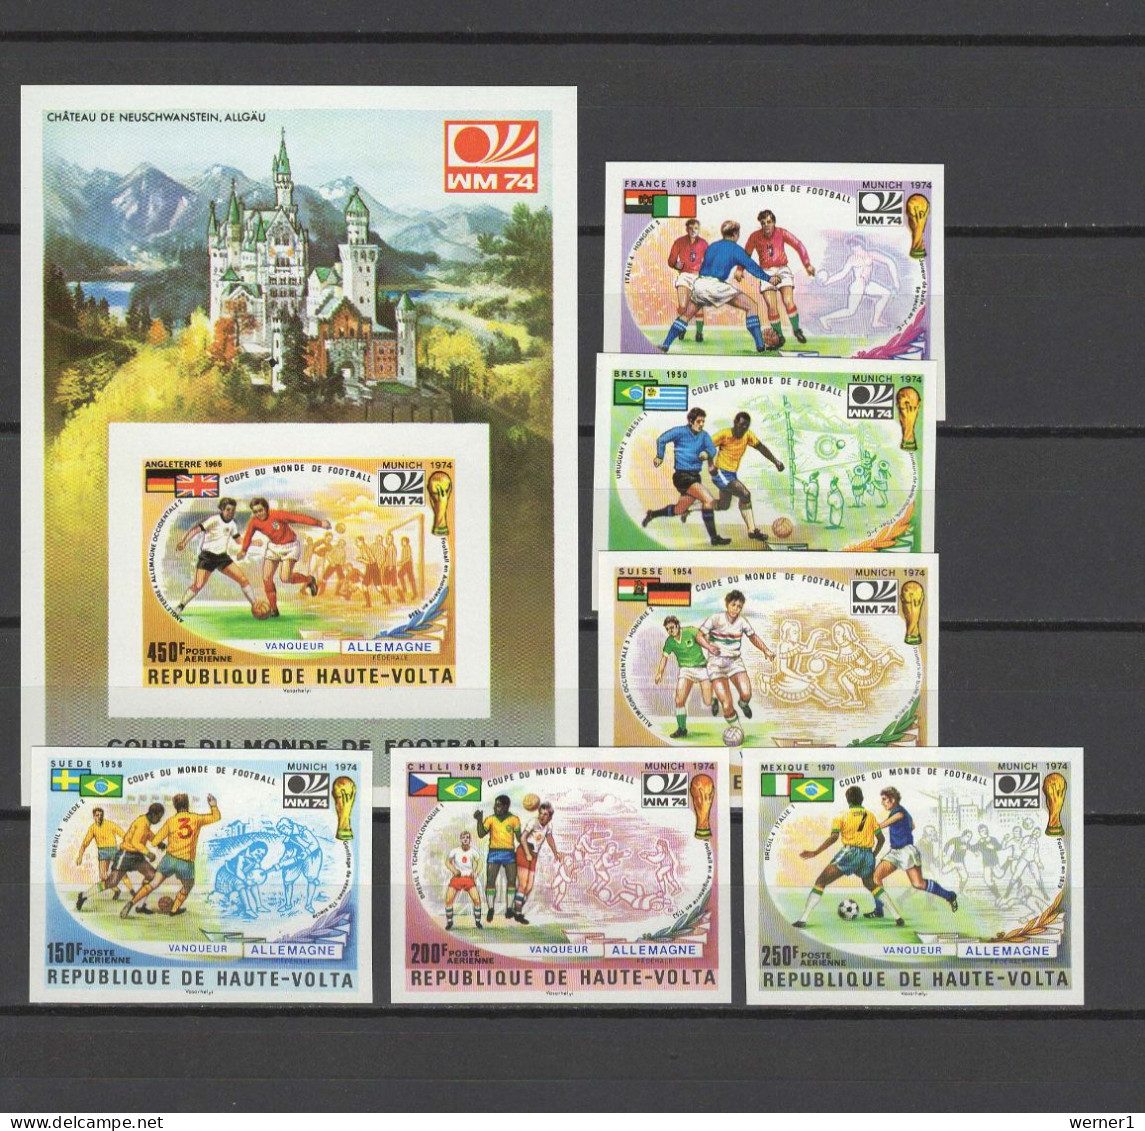 Burkina Faso (Upper Volta) 1974 Football Soccer World Cup Set Of 6 + S/s Imperf. MNH -scarce- - 1974 – Germania Ovest